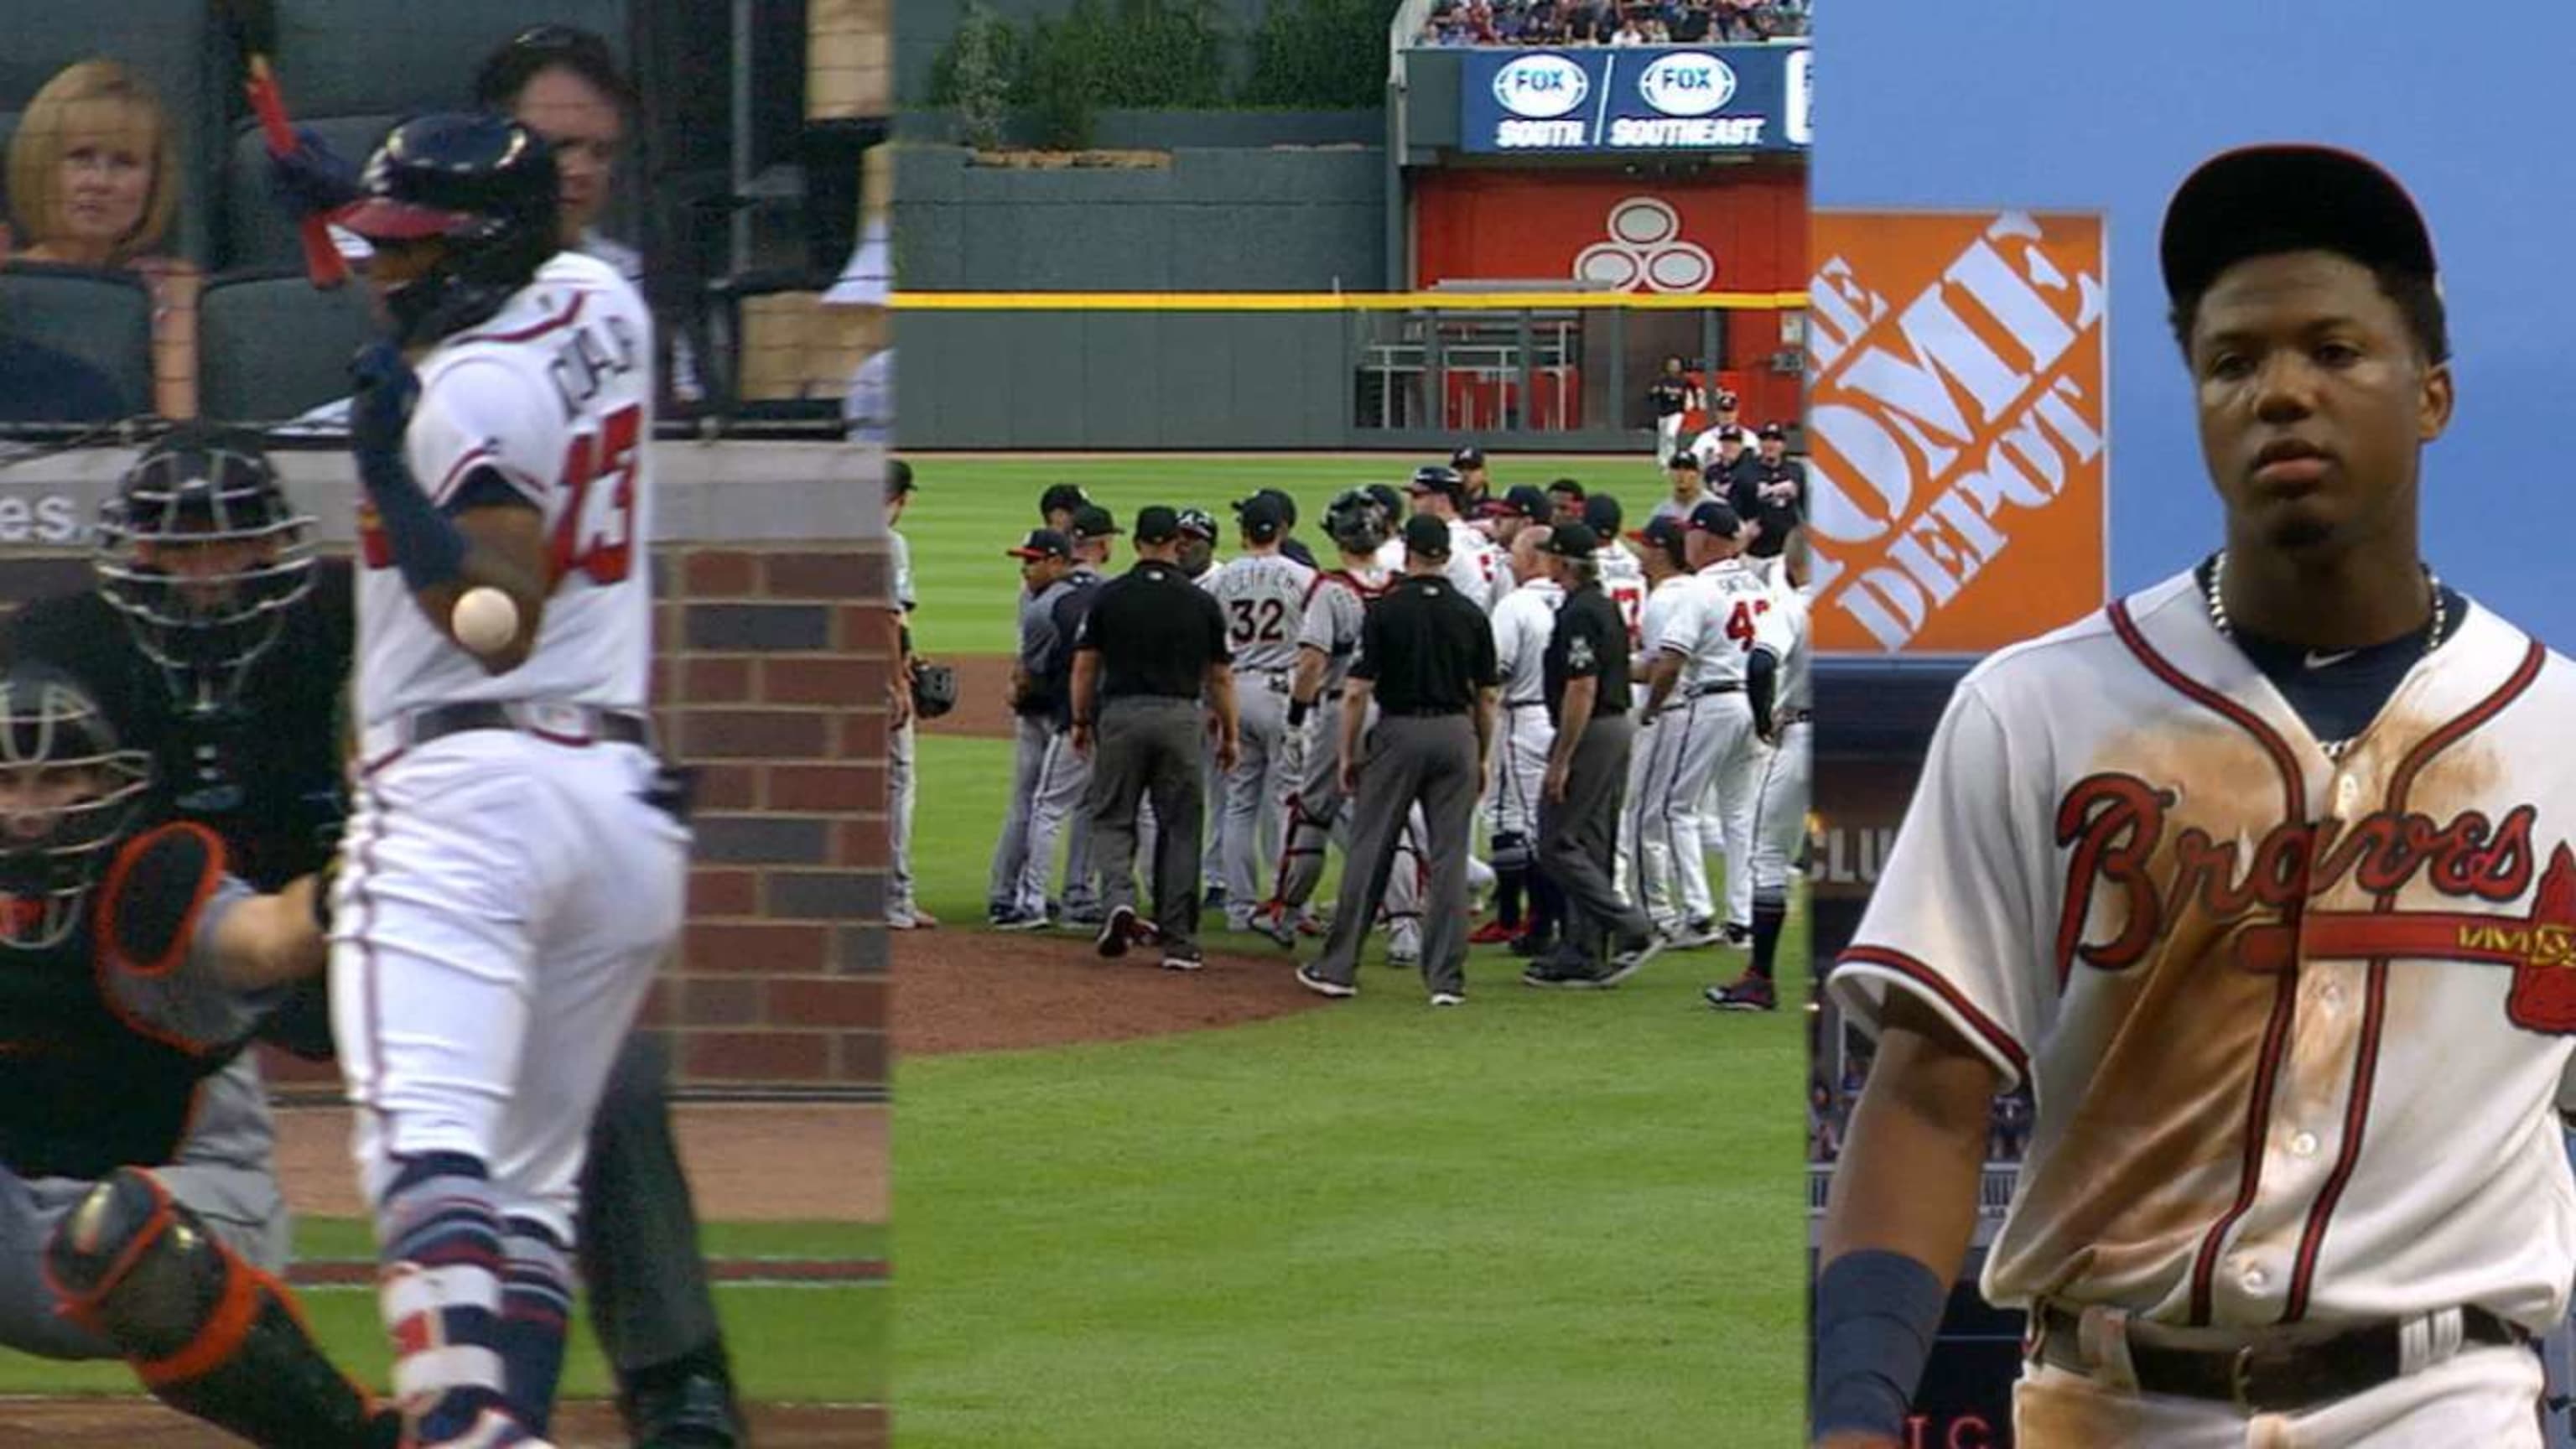 Ronald Acuña Jr. upset about getting hit by pitch after catcher visit